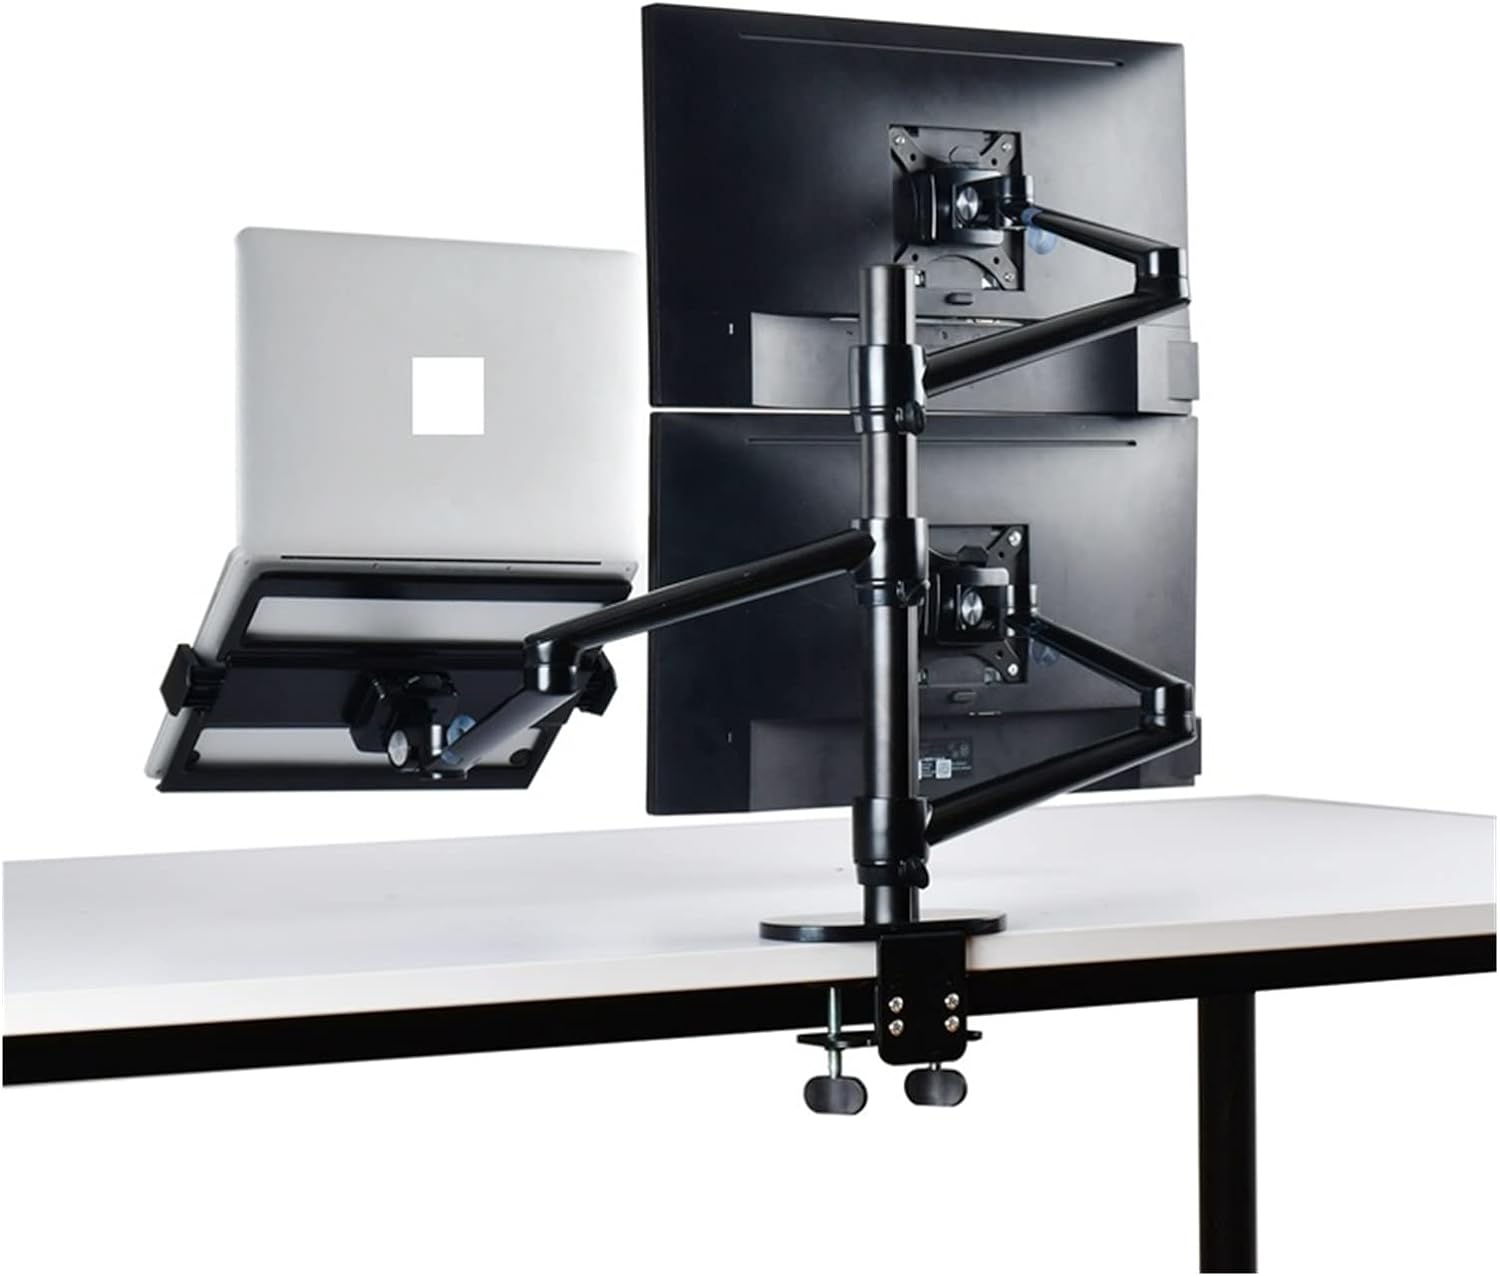 Dual Monitor Arm Mount with Laptop Stand Desk Mount Bracket Black